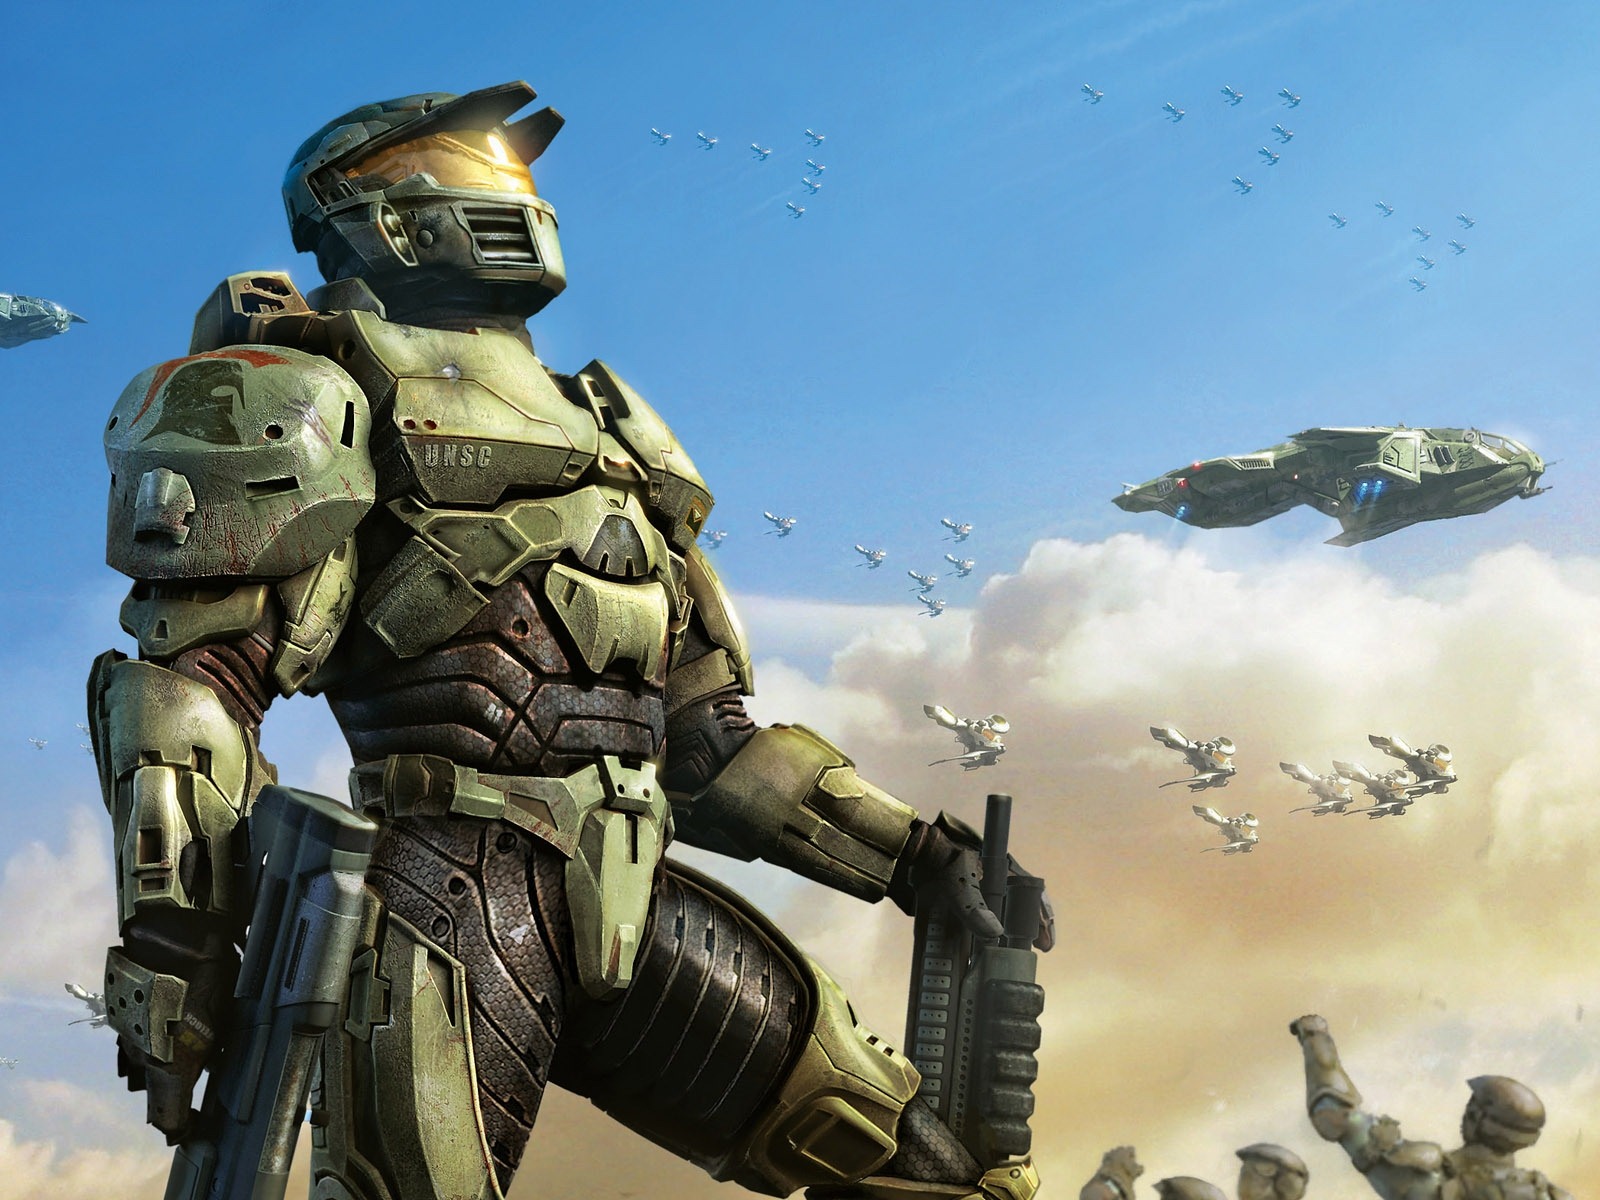 Halo game HD wallpapers #3 - 1600x1200